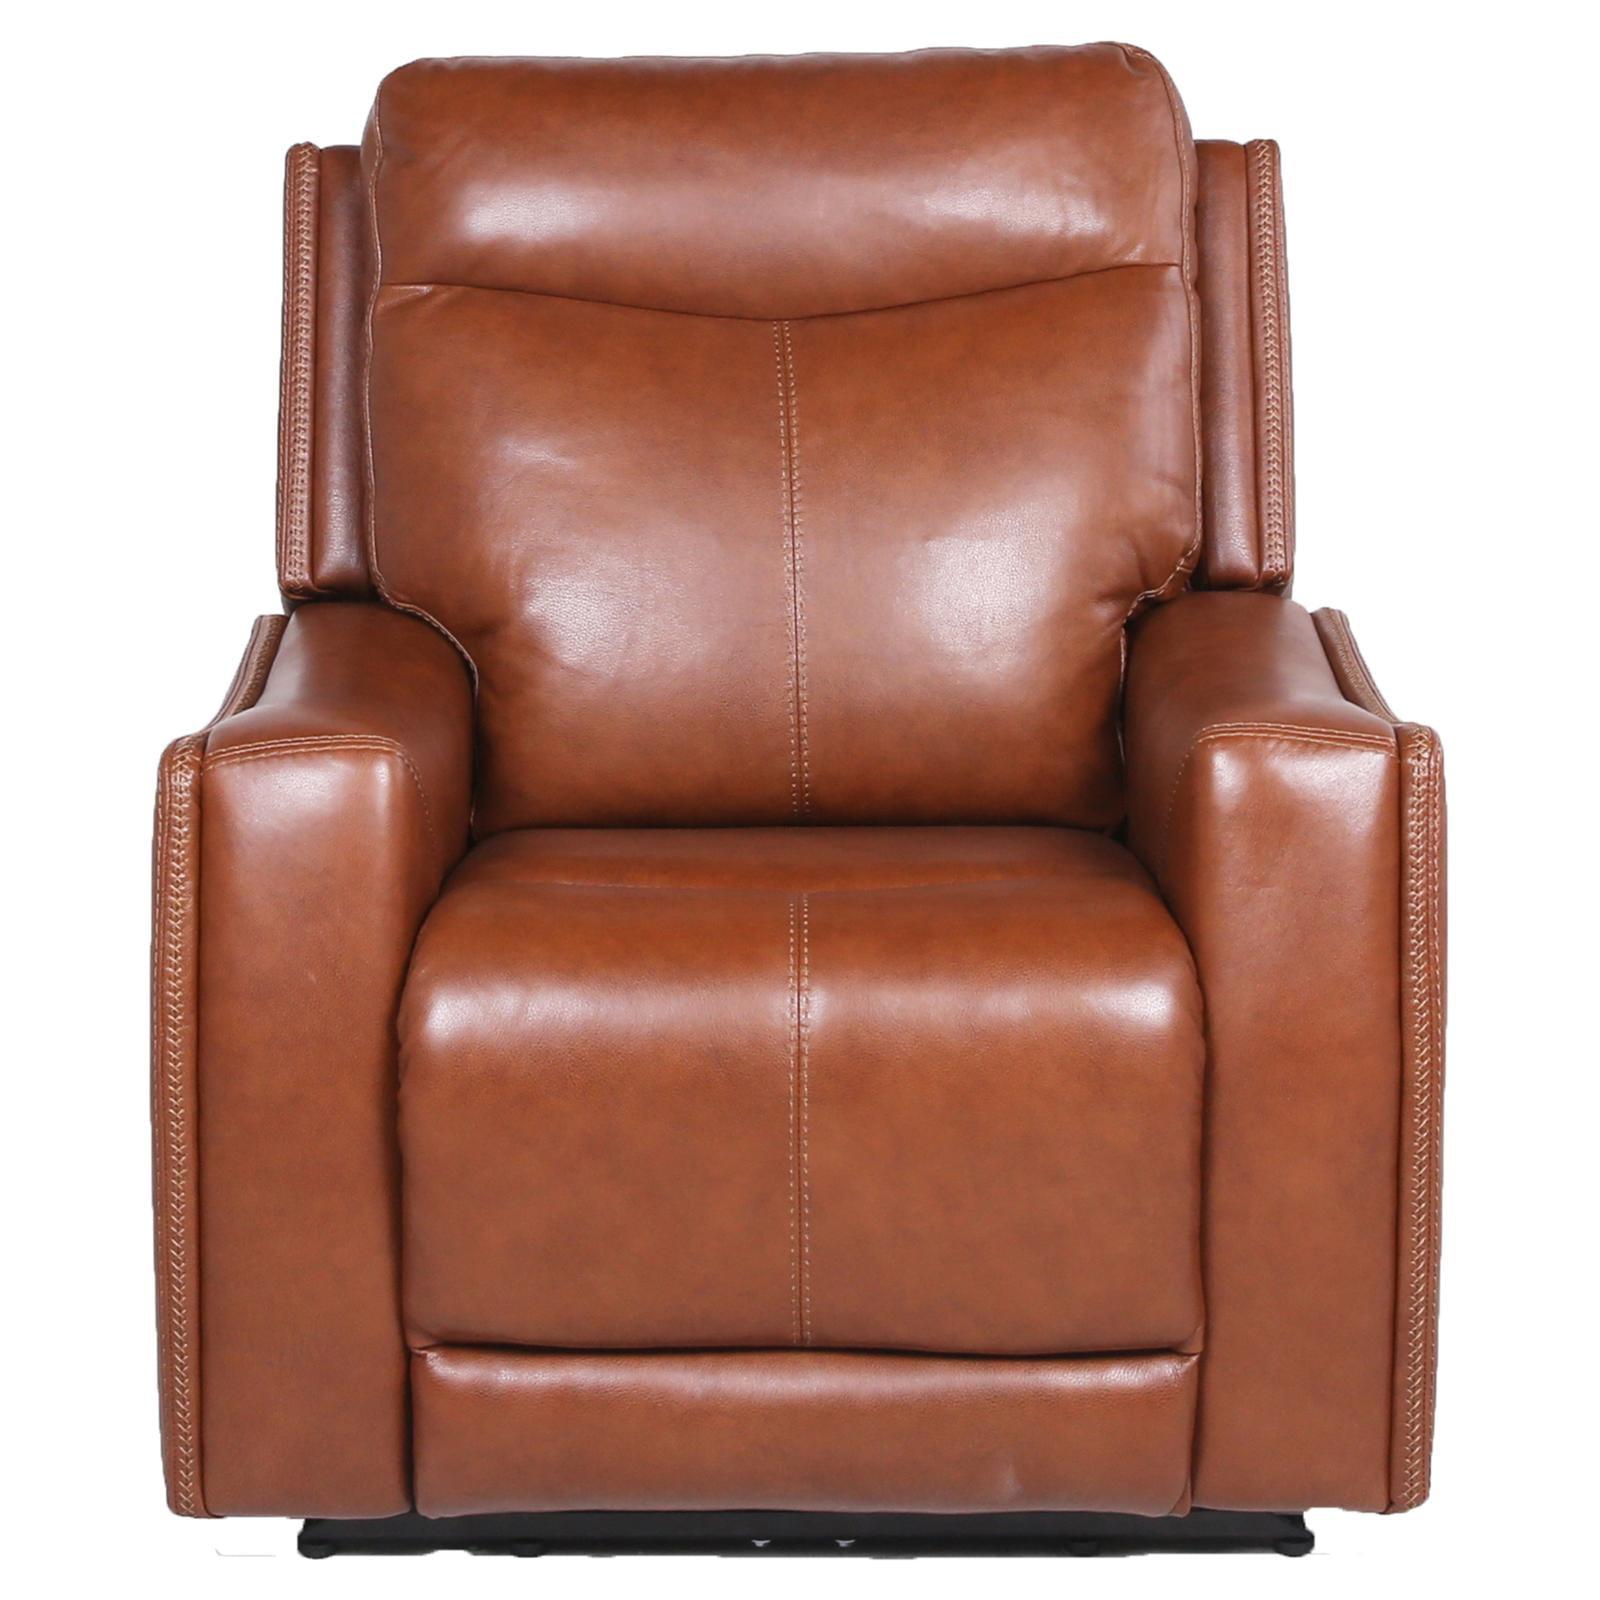 Natalia Contemporary Caramel Leather Power Recliner with USB Port